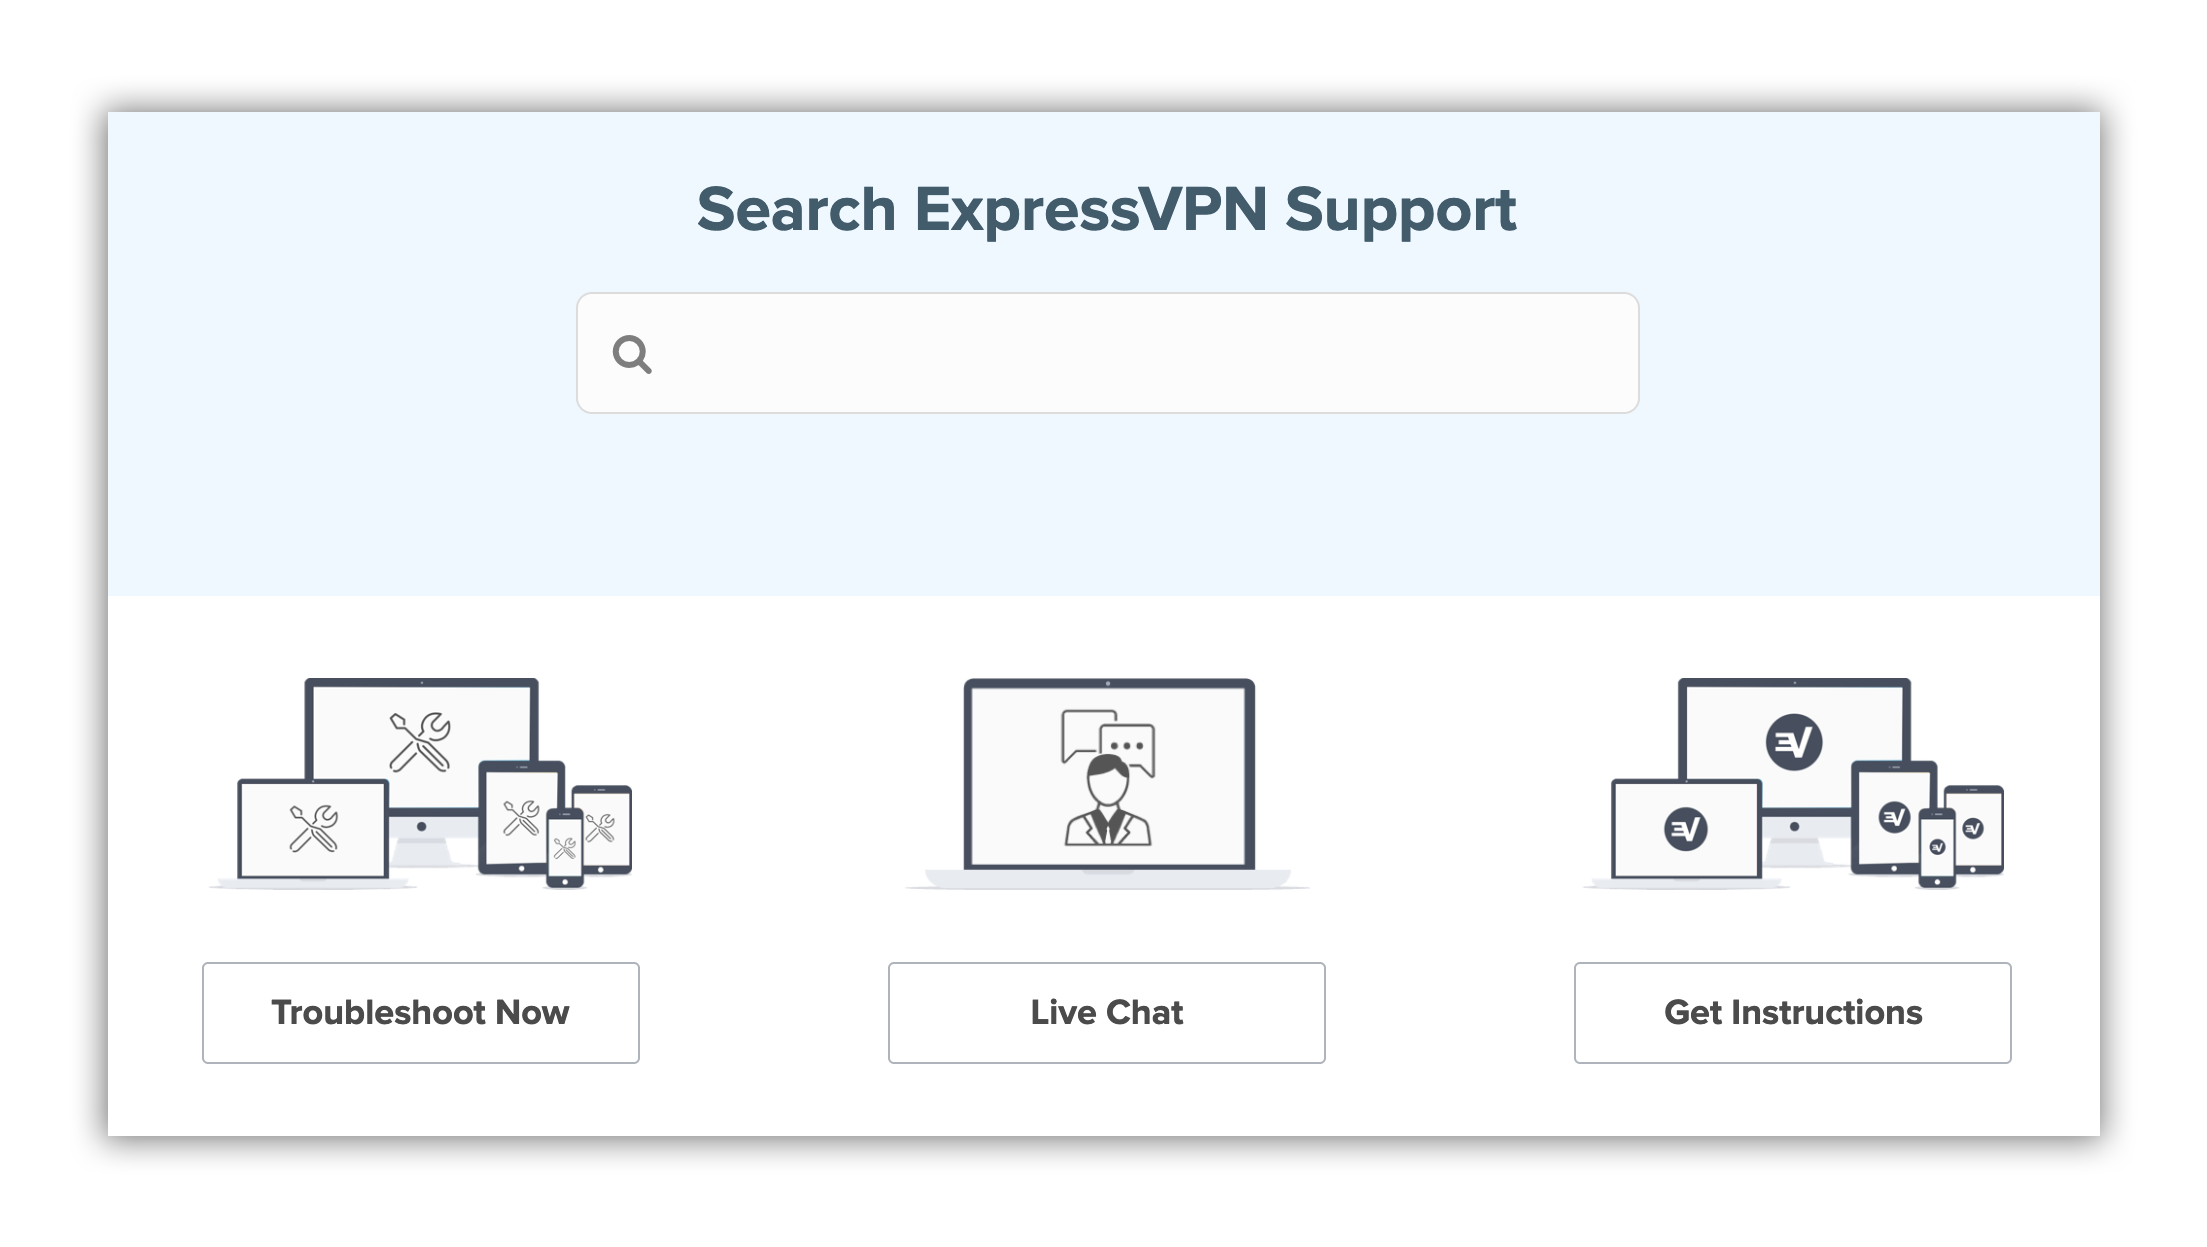 The support page of ExpressVPN is clear